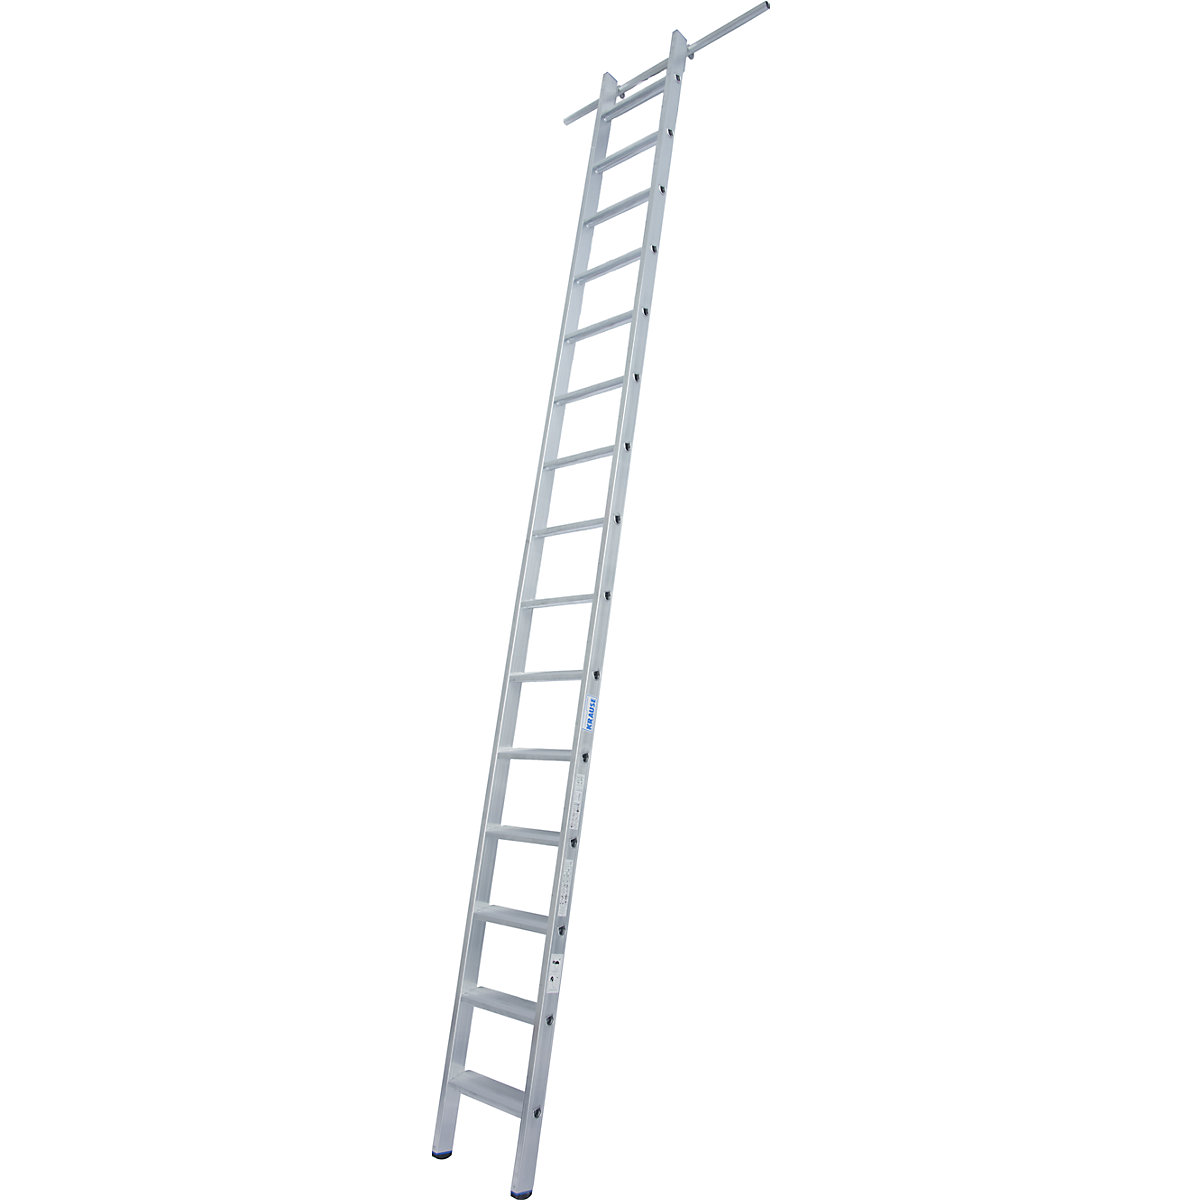 Step shelf ladder – KRAUSE, suspendable, with 1 pair of hooks, 15 steps-5